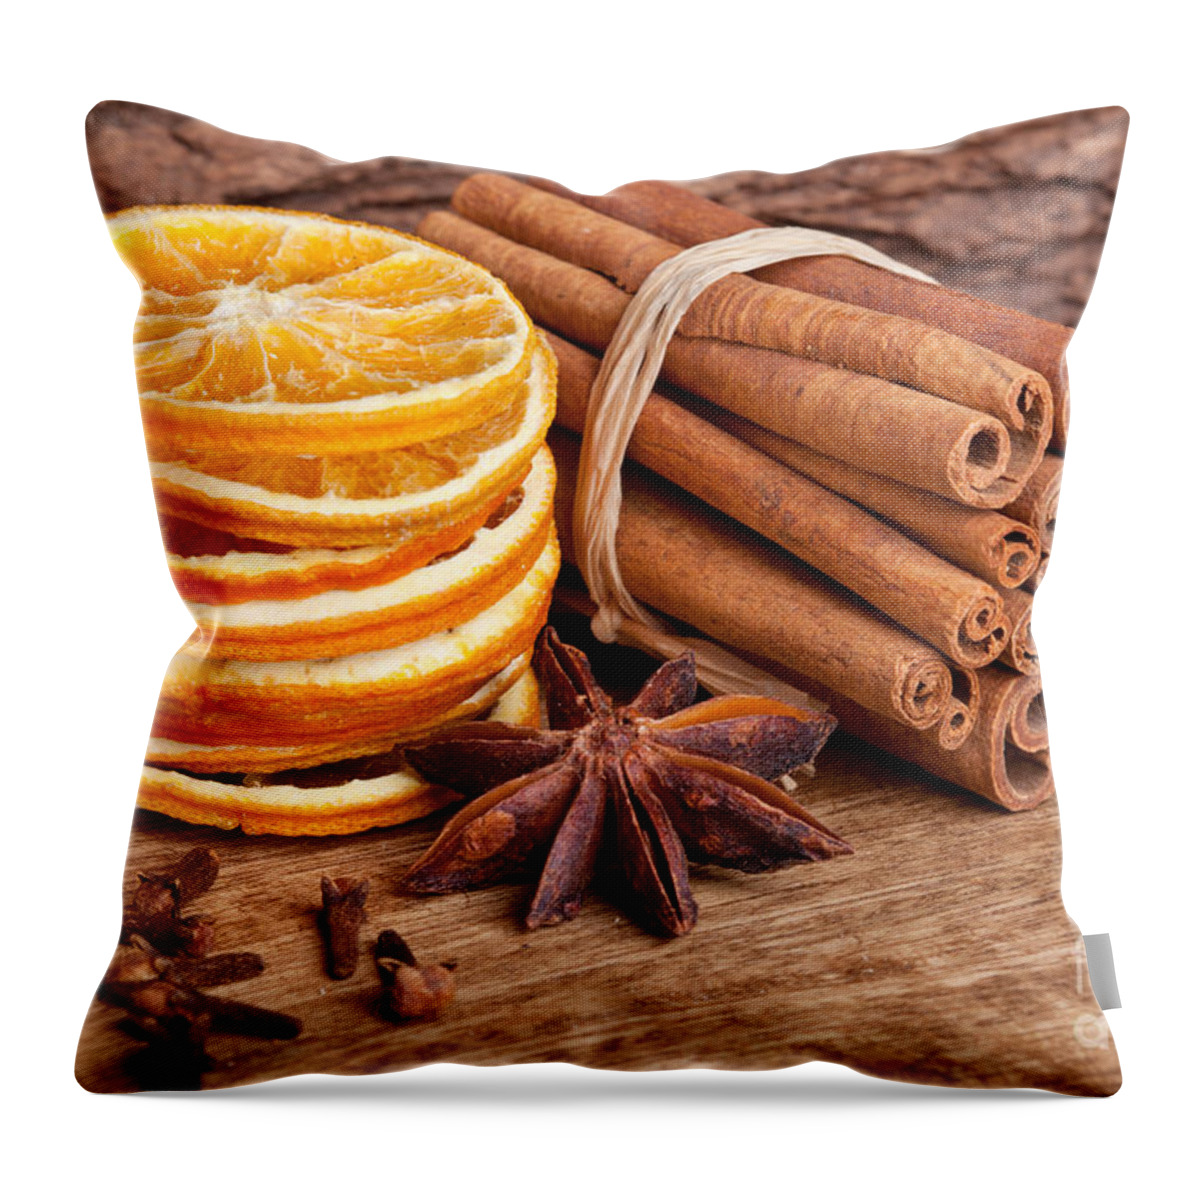 Cinnamon Throw Pillow featuring the photograph Winter Spices by Nailia Schwarz